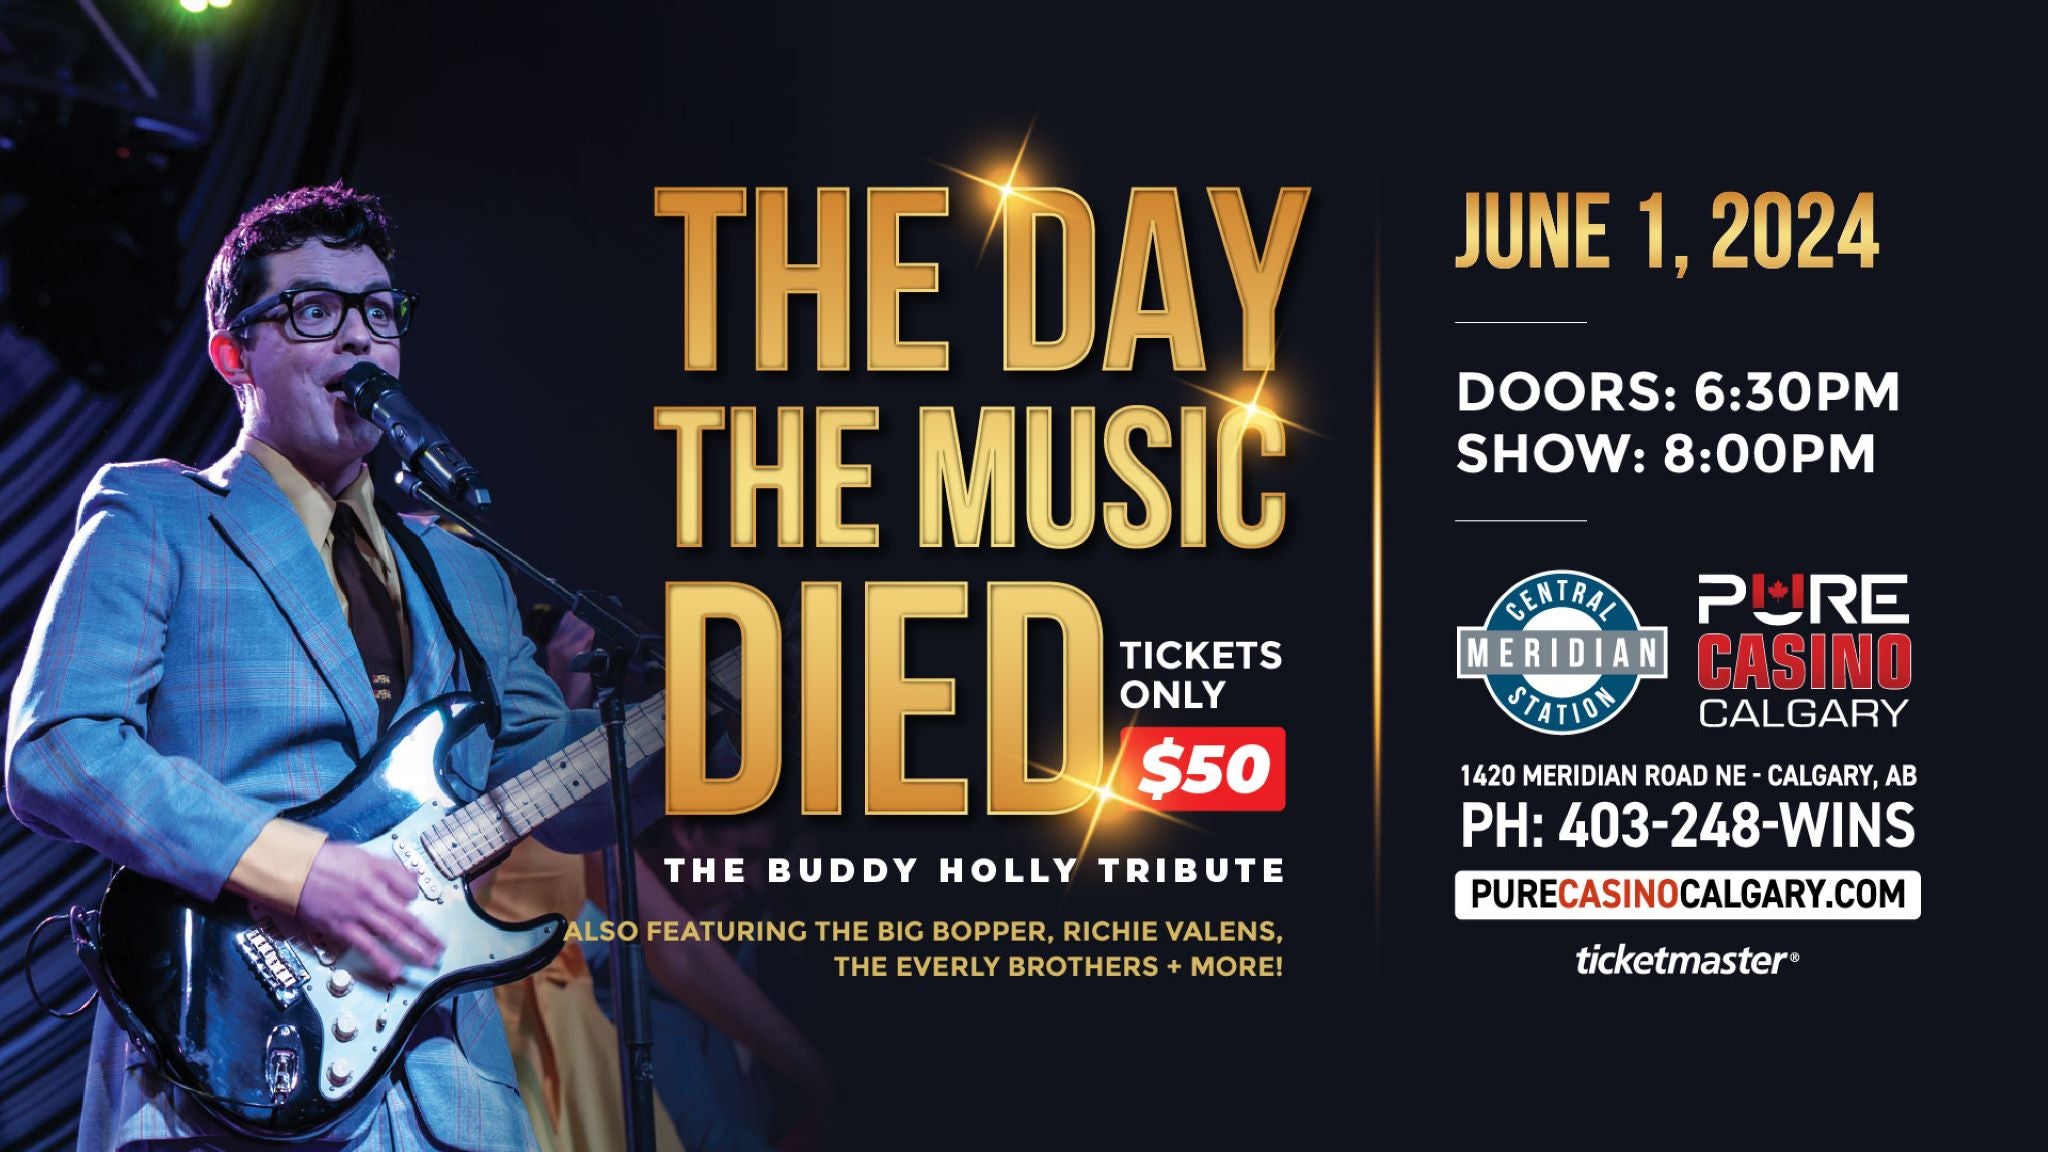 The Day the Music Died - The Buddy Holly Tribute